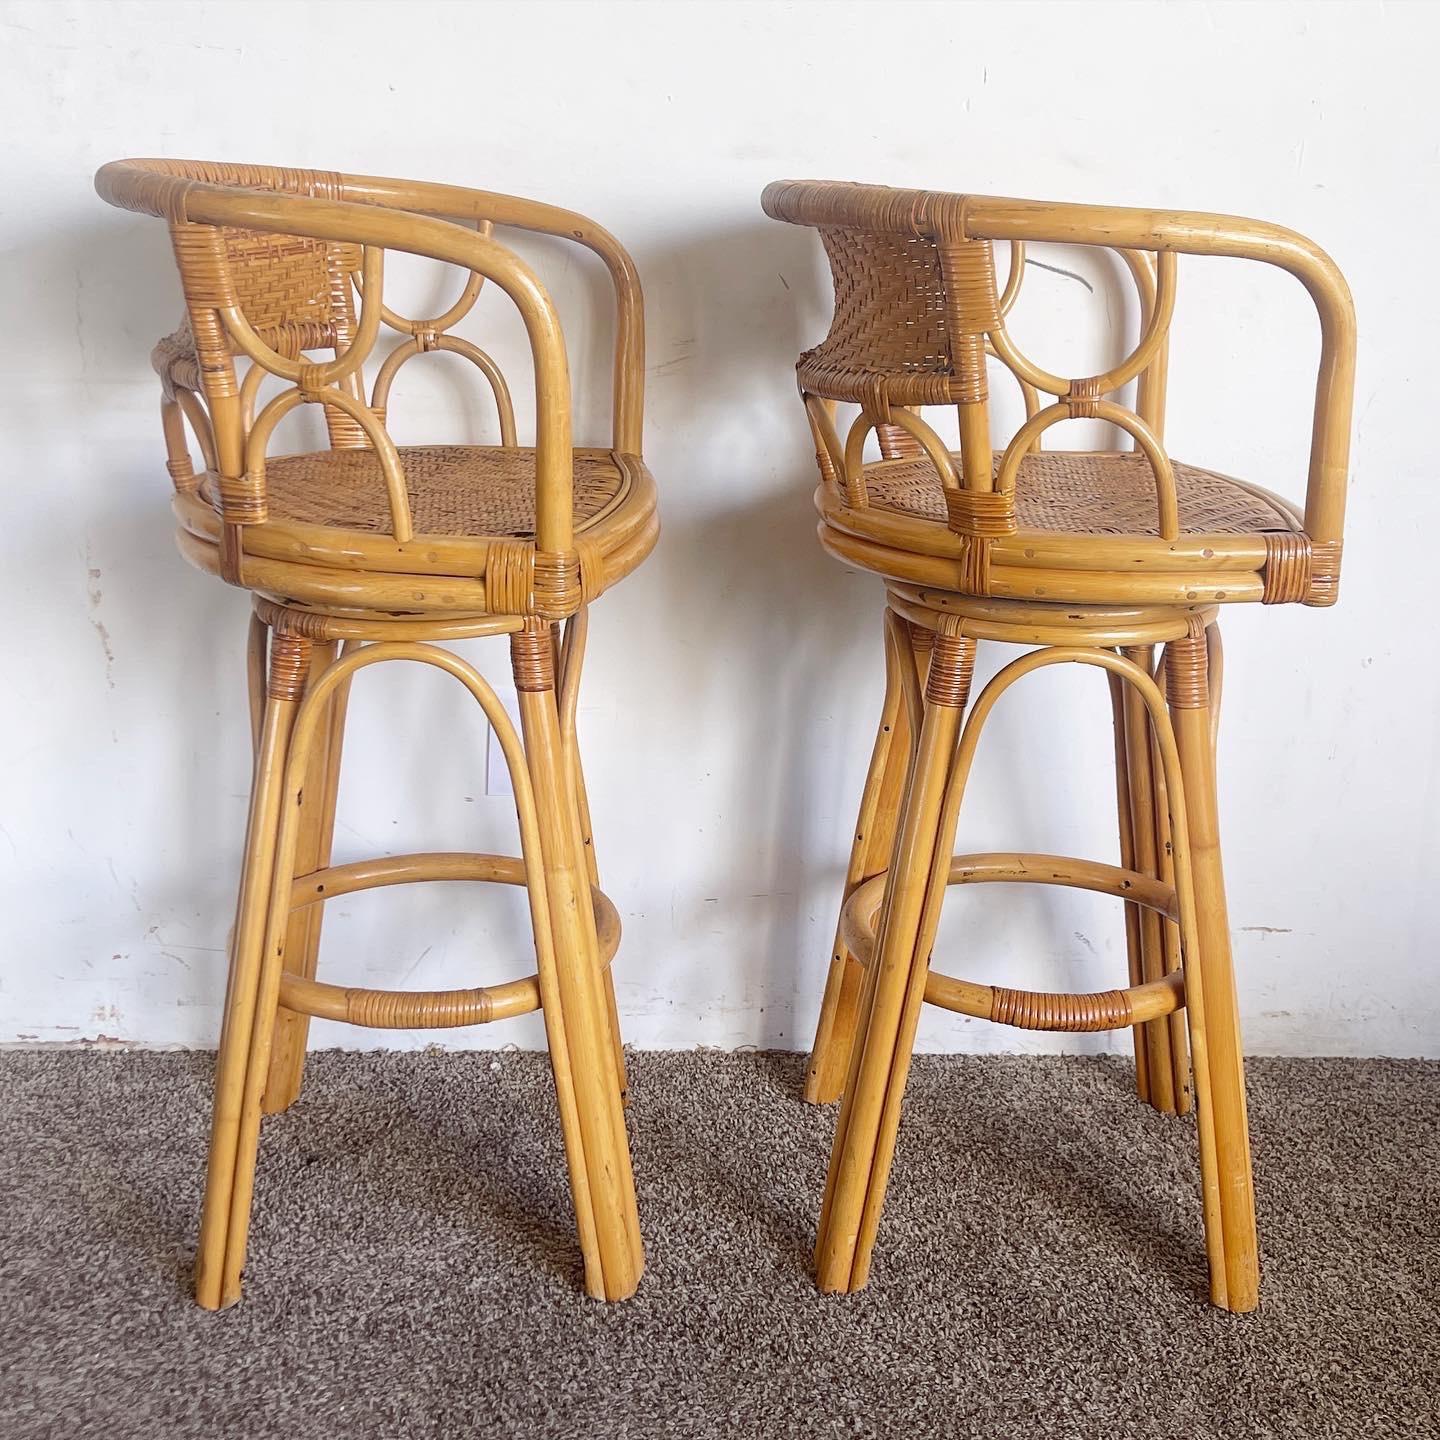 Indonesian Boho Chick Bamboo Rattan and Wicker Swivel Stools - a Pair For Sale